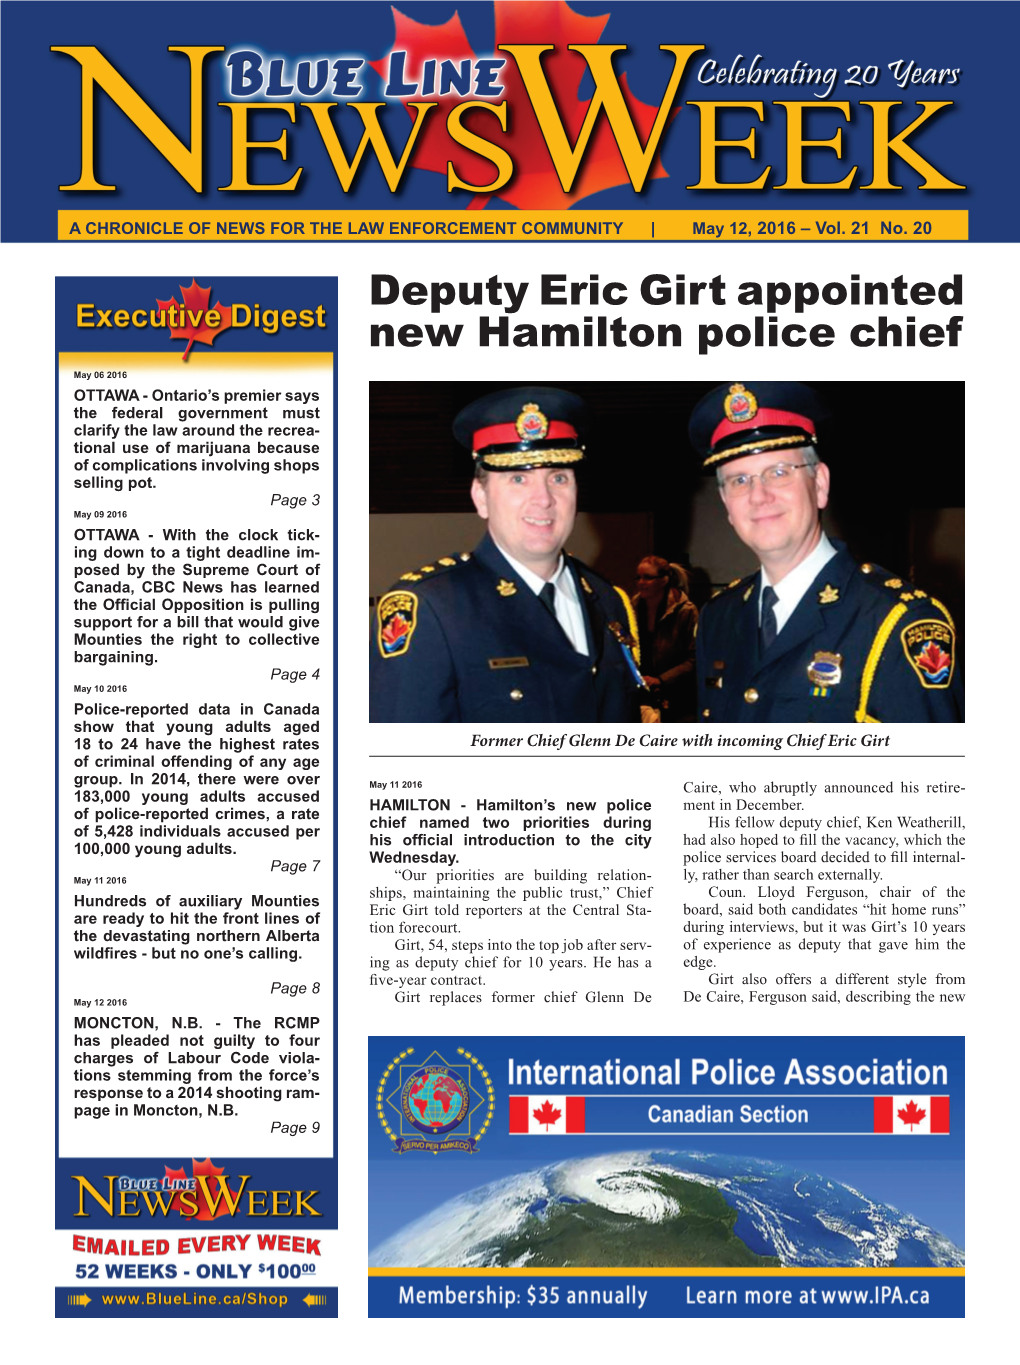 Deputy Eric Girt Appointed New Hamilton Police Chief